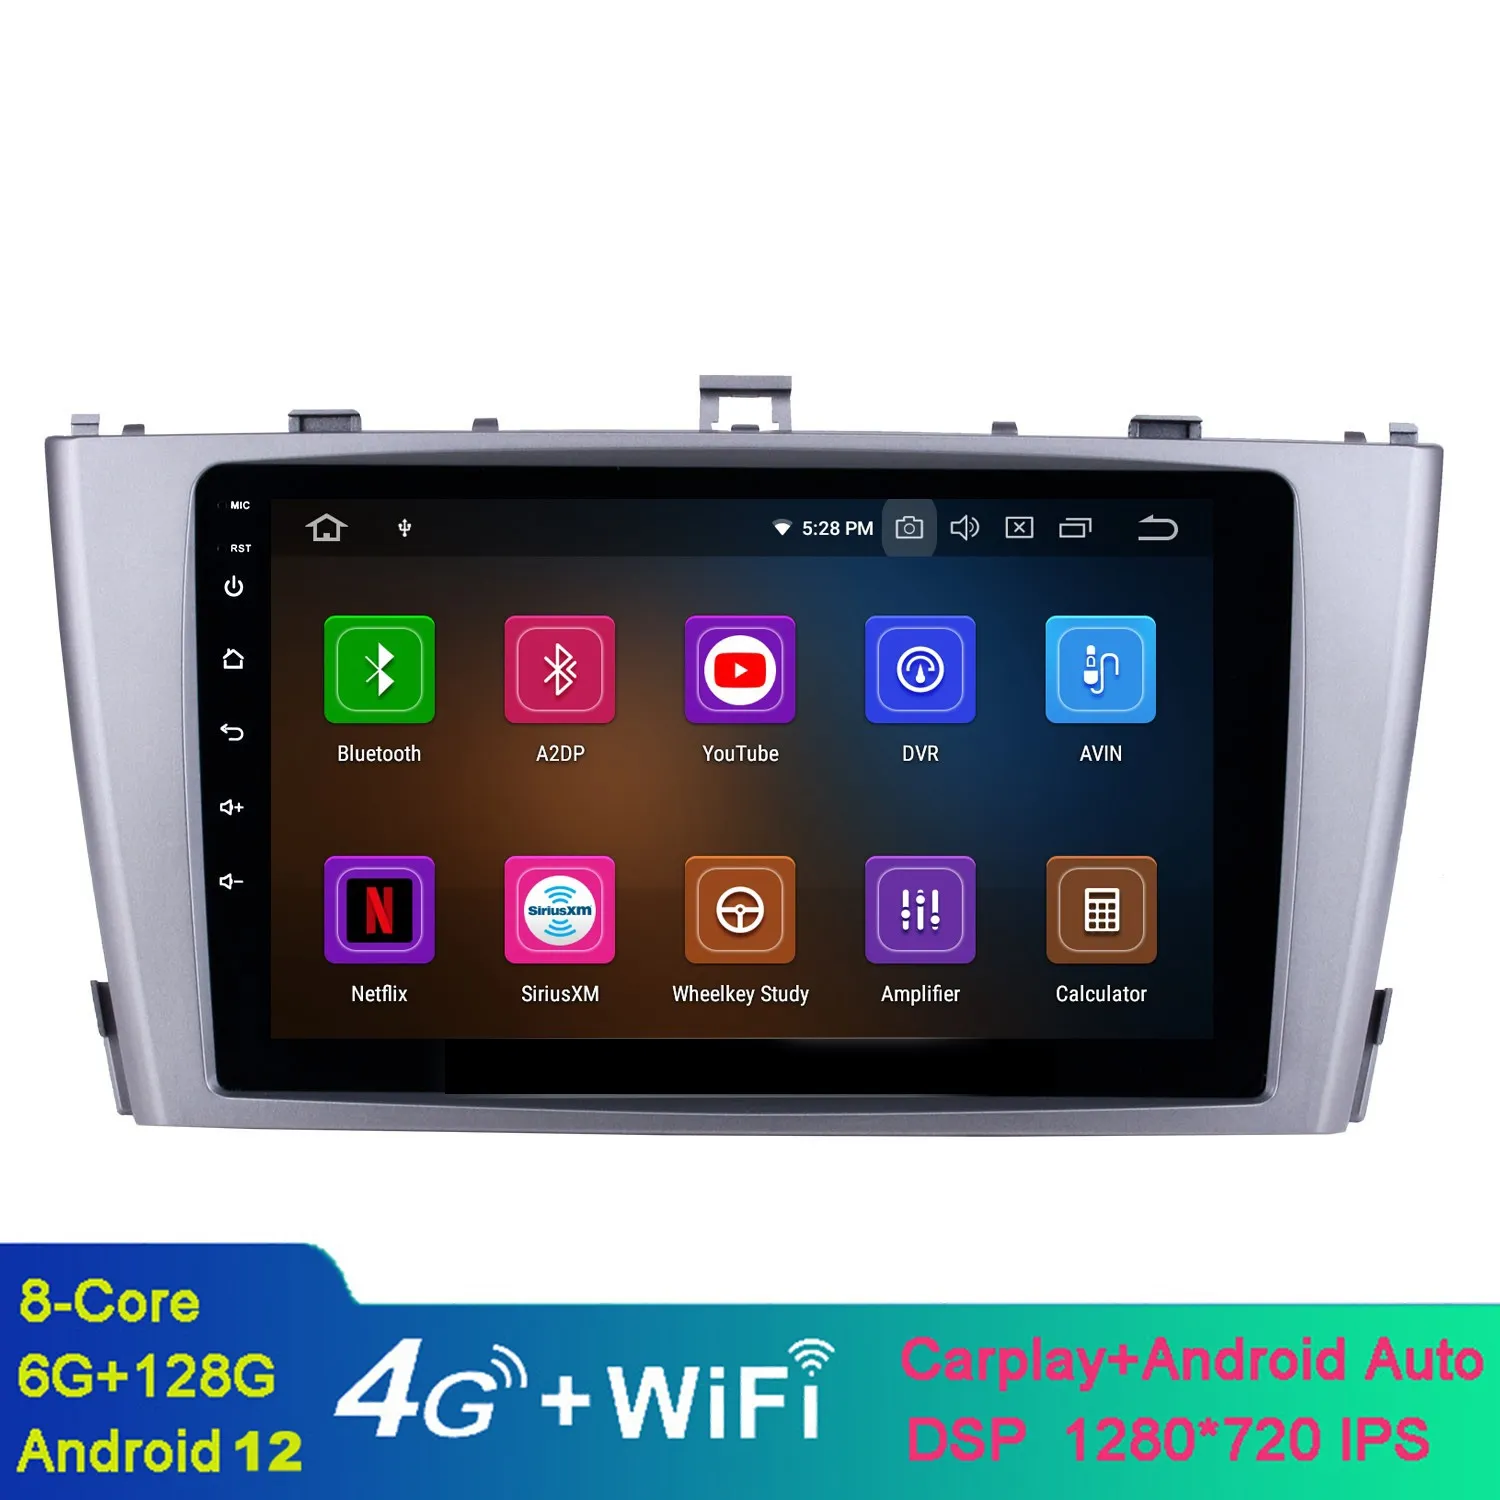 Auto Video Radio GPS Navi Stereo Android 9 inch voor 2009-2013 Toyota Avensis met WiFi Bluetooth Music USB Aux Support DAB